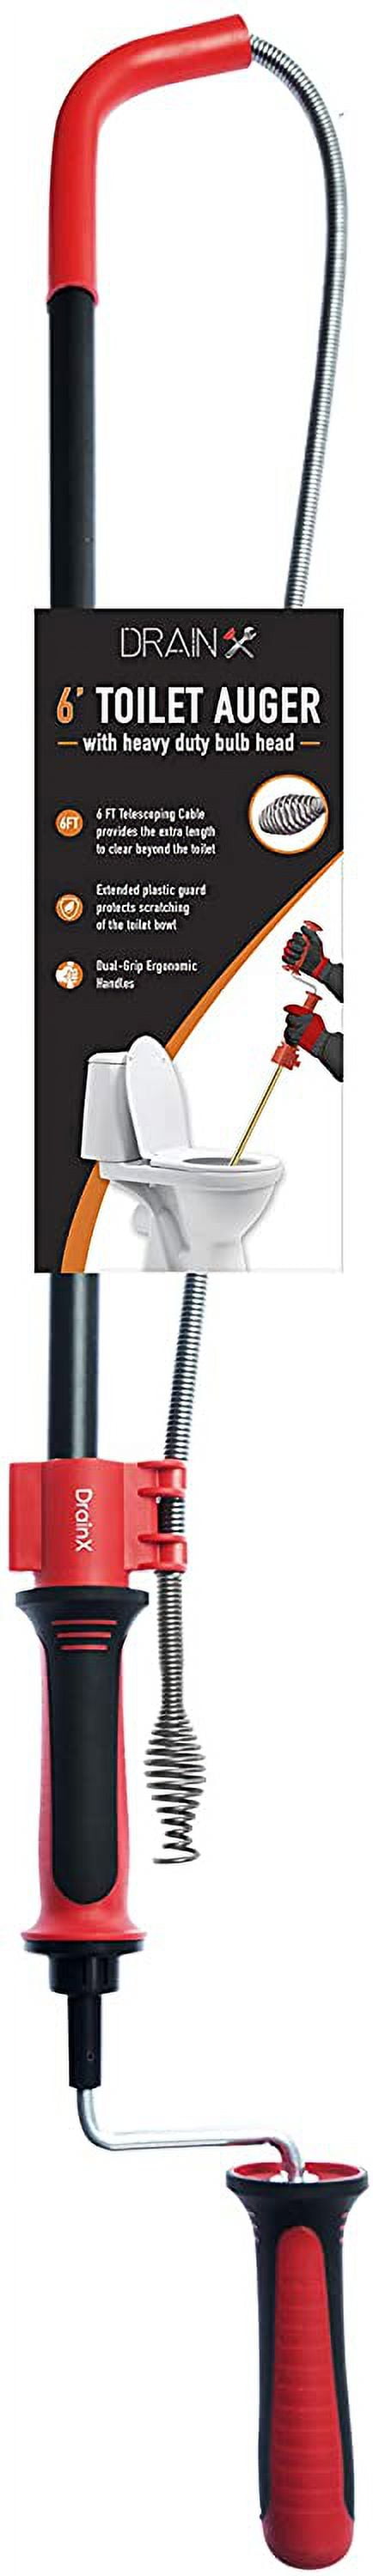 DrainX 6 Foot Toilet Auger | Manual or Drill Powered Closet Auger with Drop  Head for T-Junction Pipes, Plastic Angled Guard for Porcelain Protection